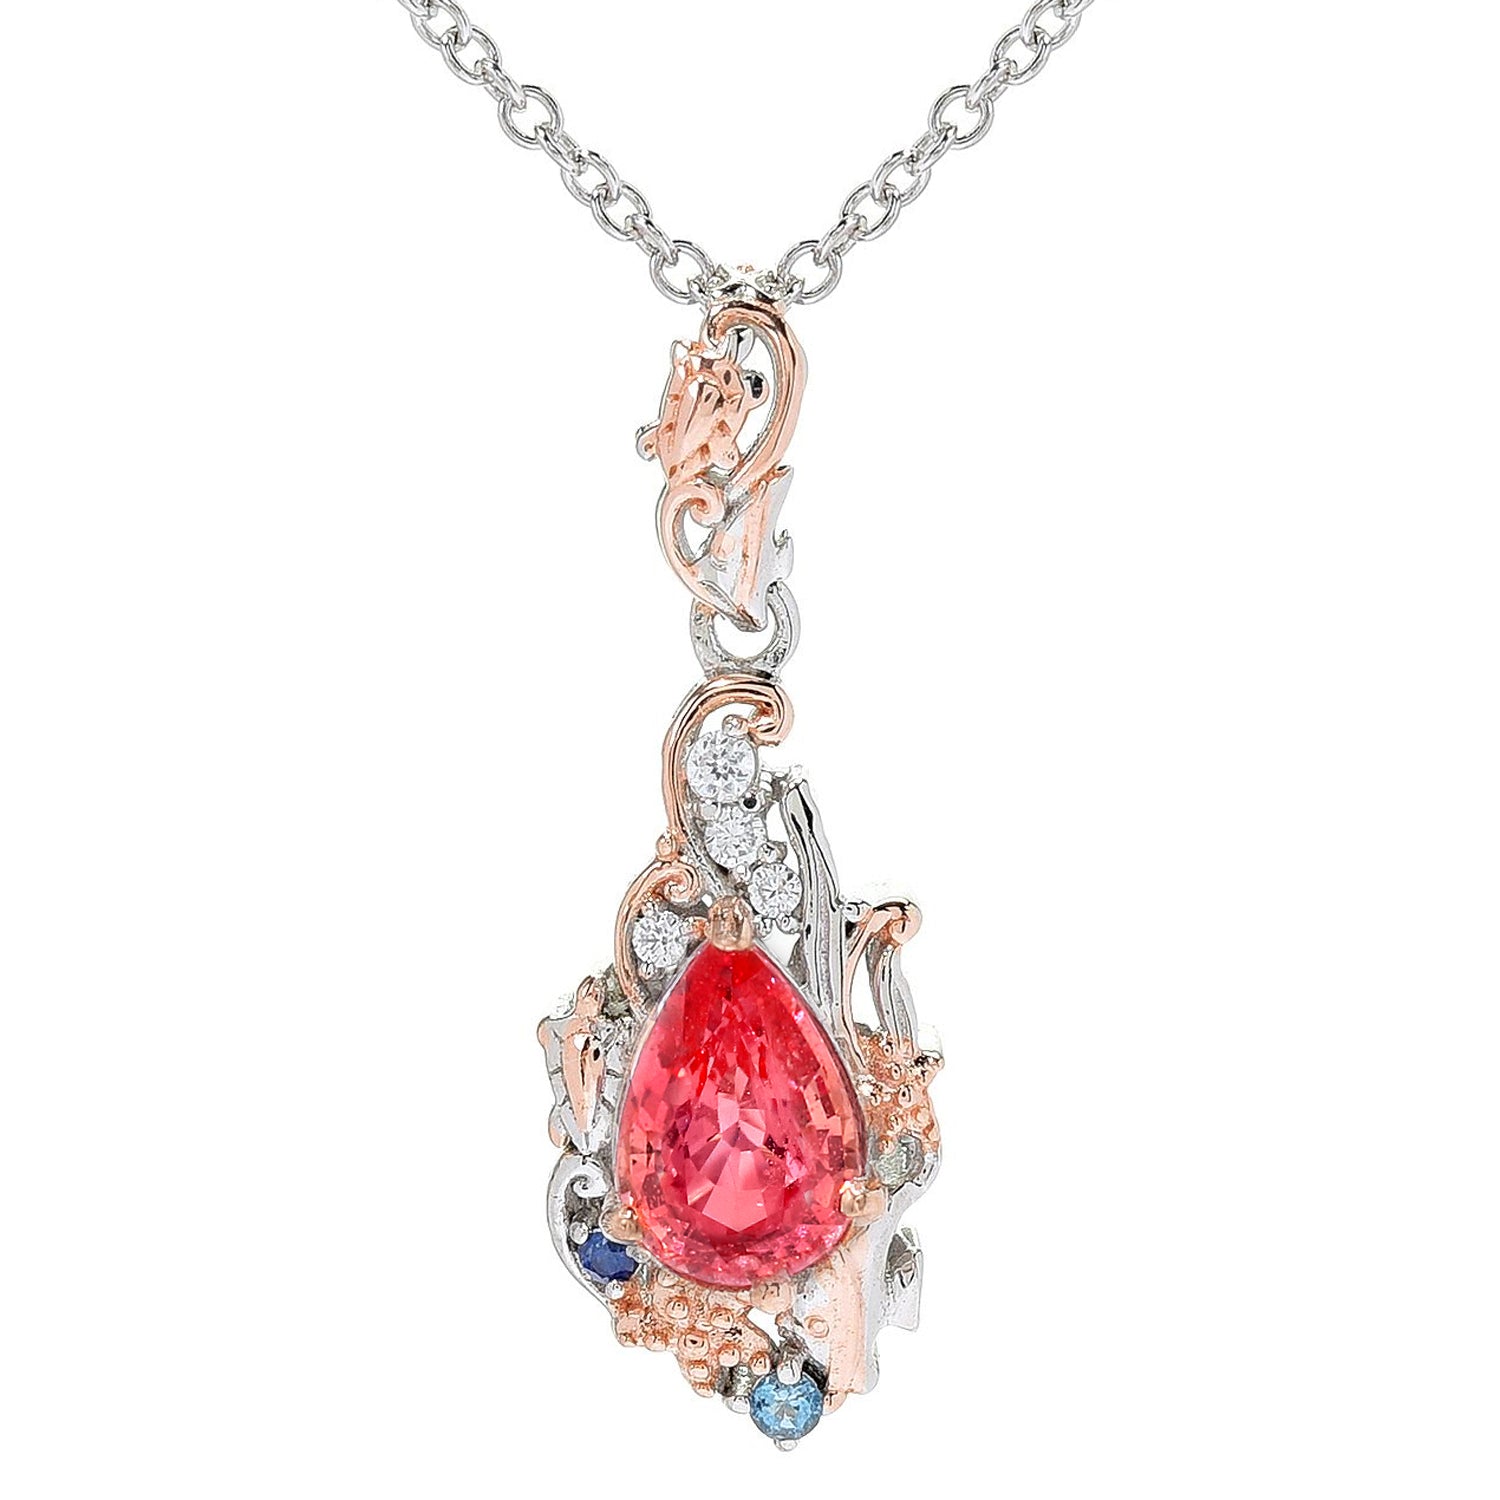 Limited Edition Gems en Vogue Luxe, One-of-a-Kind 2.22ctw Padparadscha Sapphire & Multi Gemstones Sealife Pendant